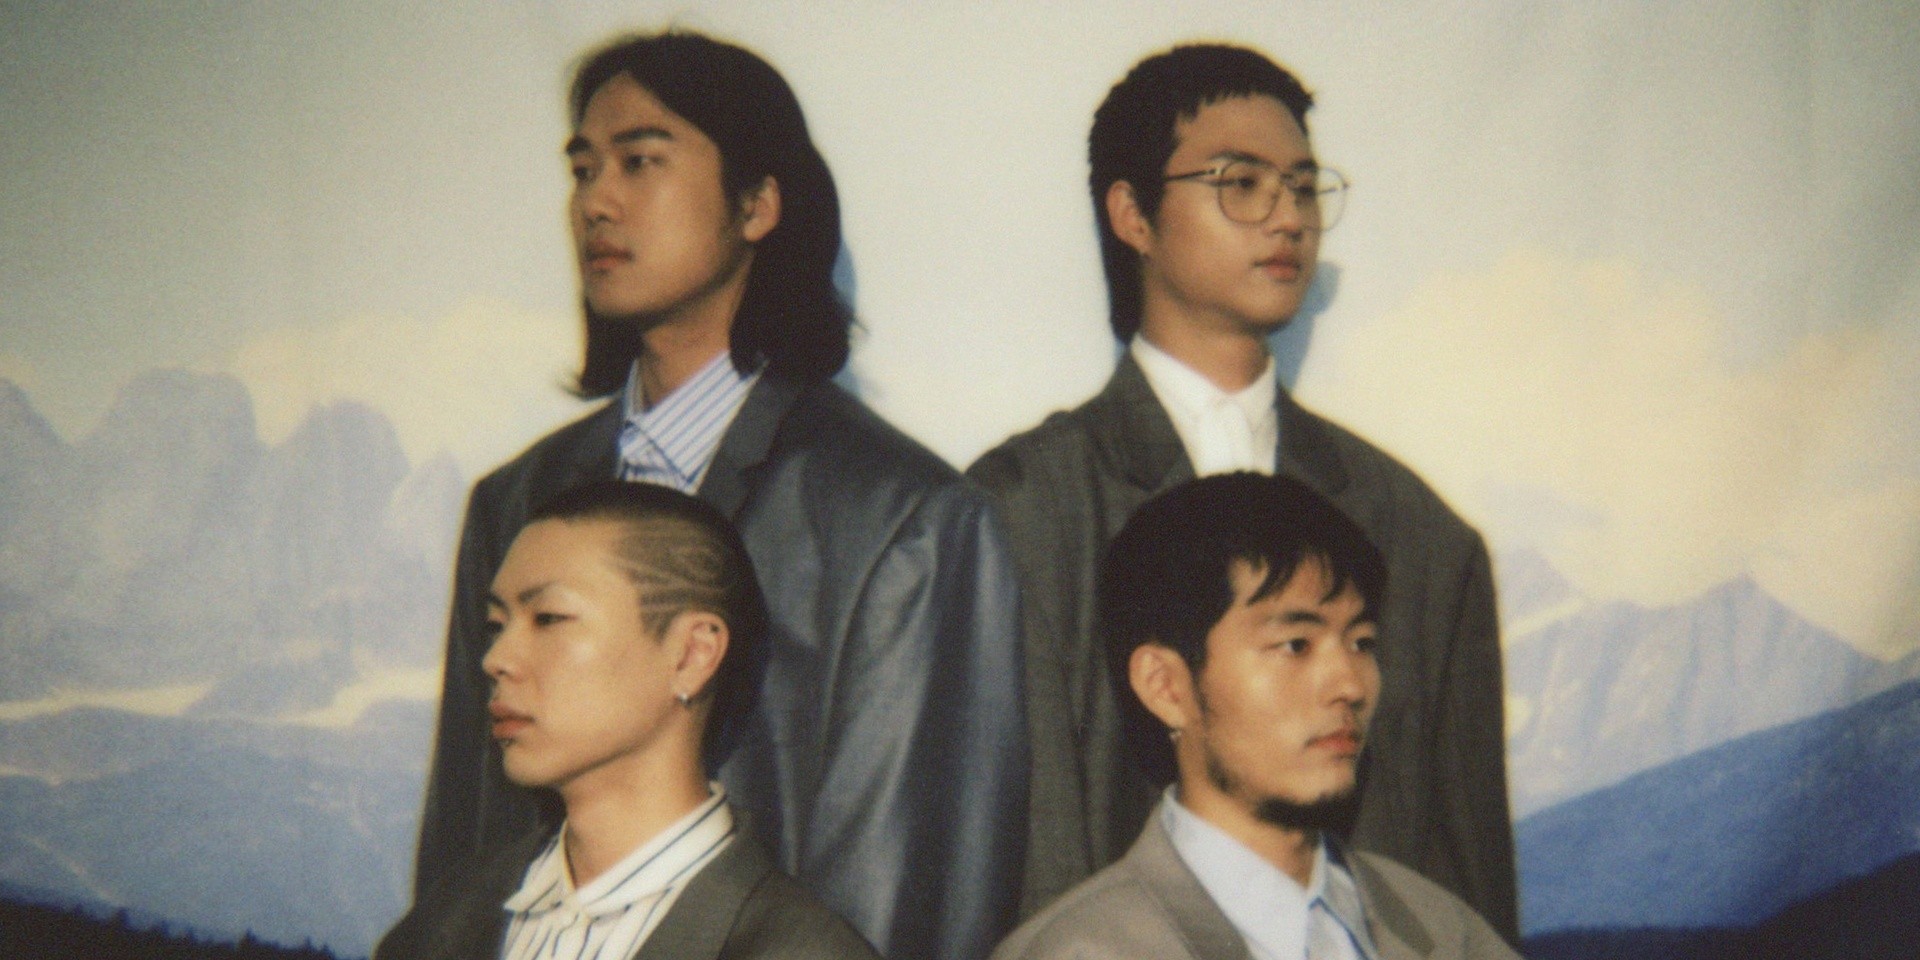 "If our album could trigger someone to give a thought about what ‘true love and happiness’ are, I'd be more than happy": An interview with HYUKOH